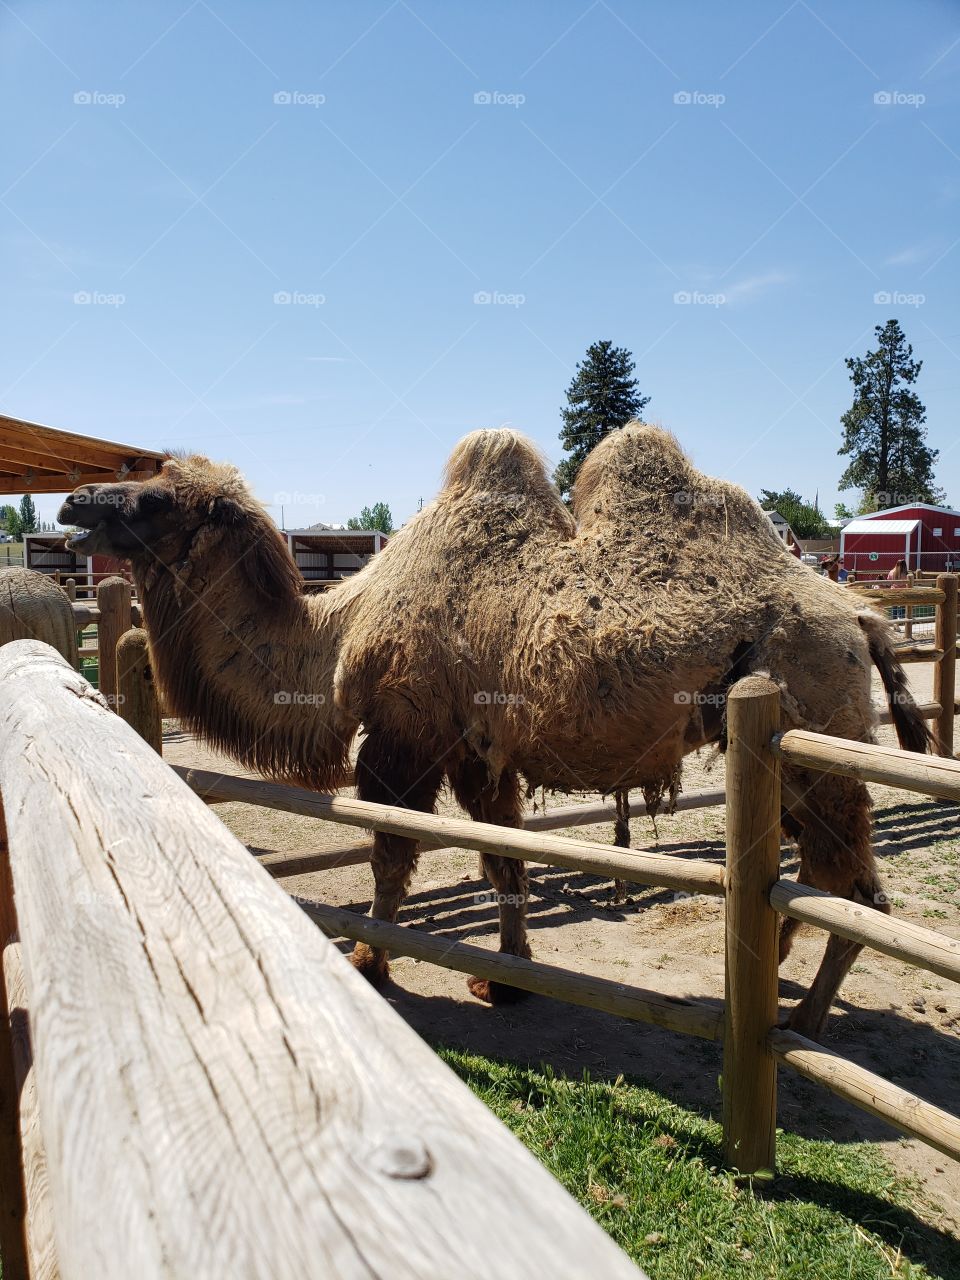 camel with two humps